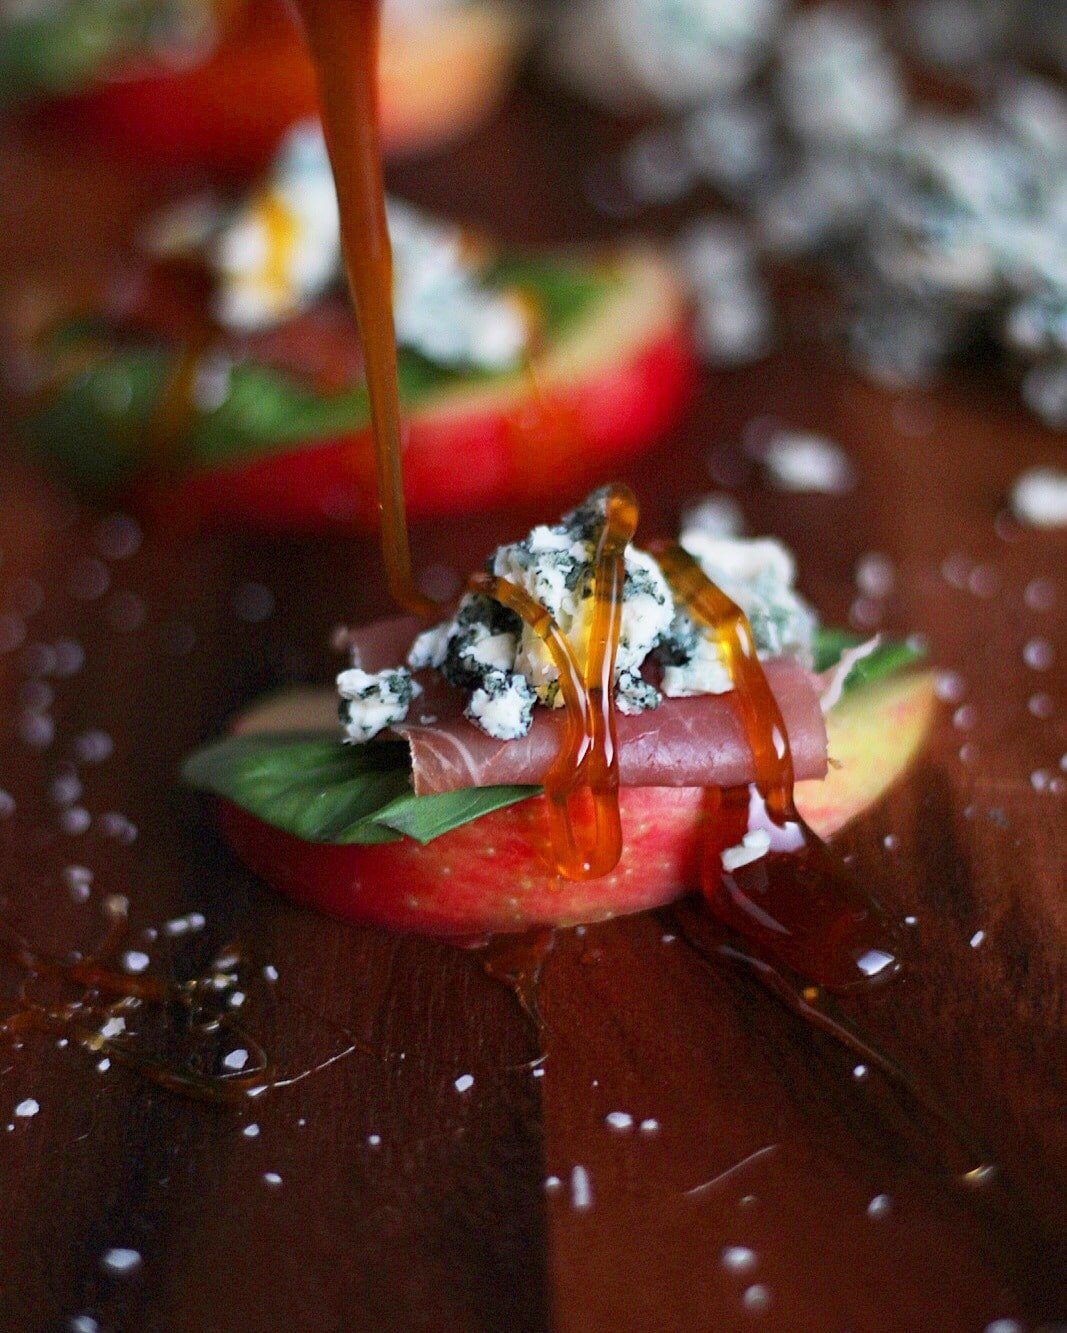 Simple Apple Wedge + Basil, Prosciutto and Blue Cheese with Pear-Infused White Balsamic Glaze. A simple and classy appetizer for your next holiday party! thewoodenskillet.com #foodphotography